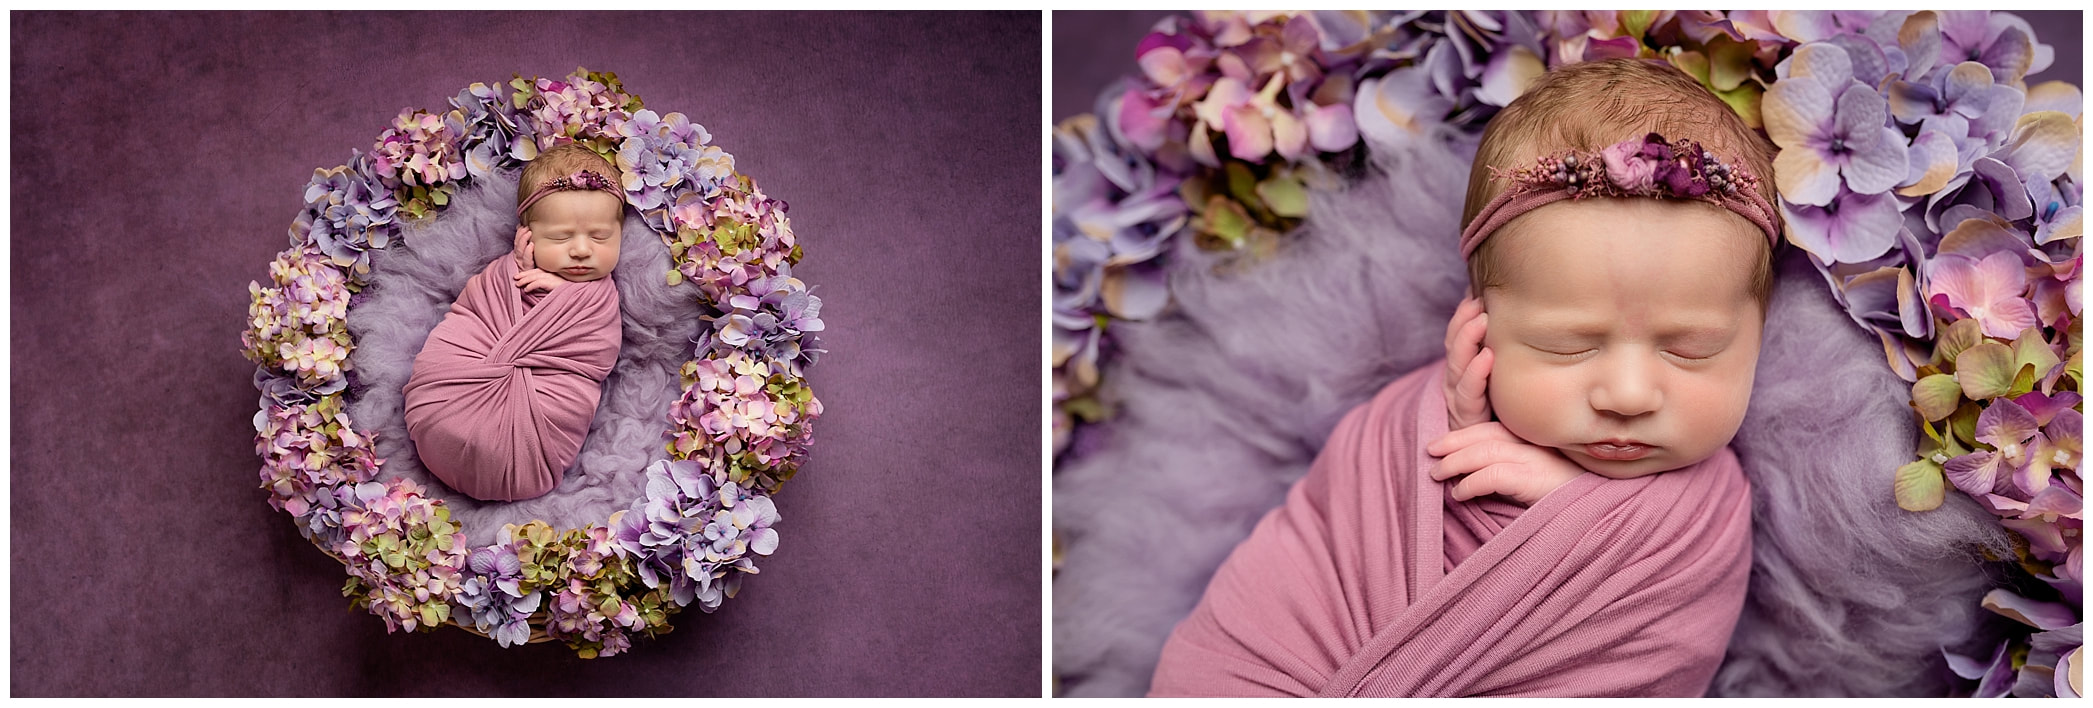 Baby in floral basket mauve and pink by newborn photographer Lynne Harper